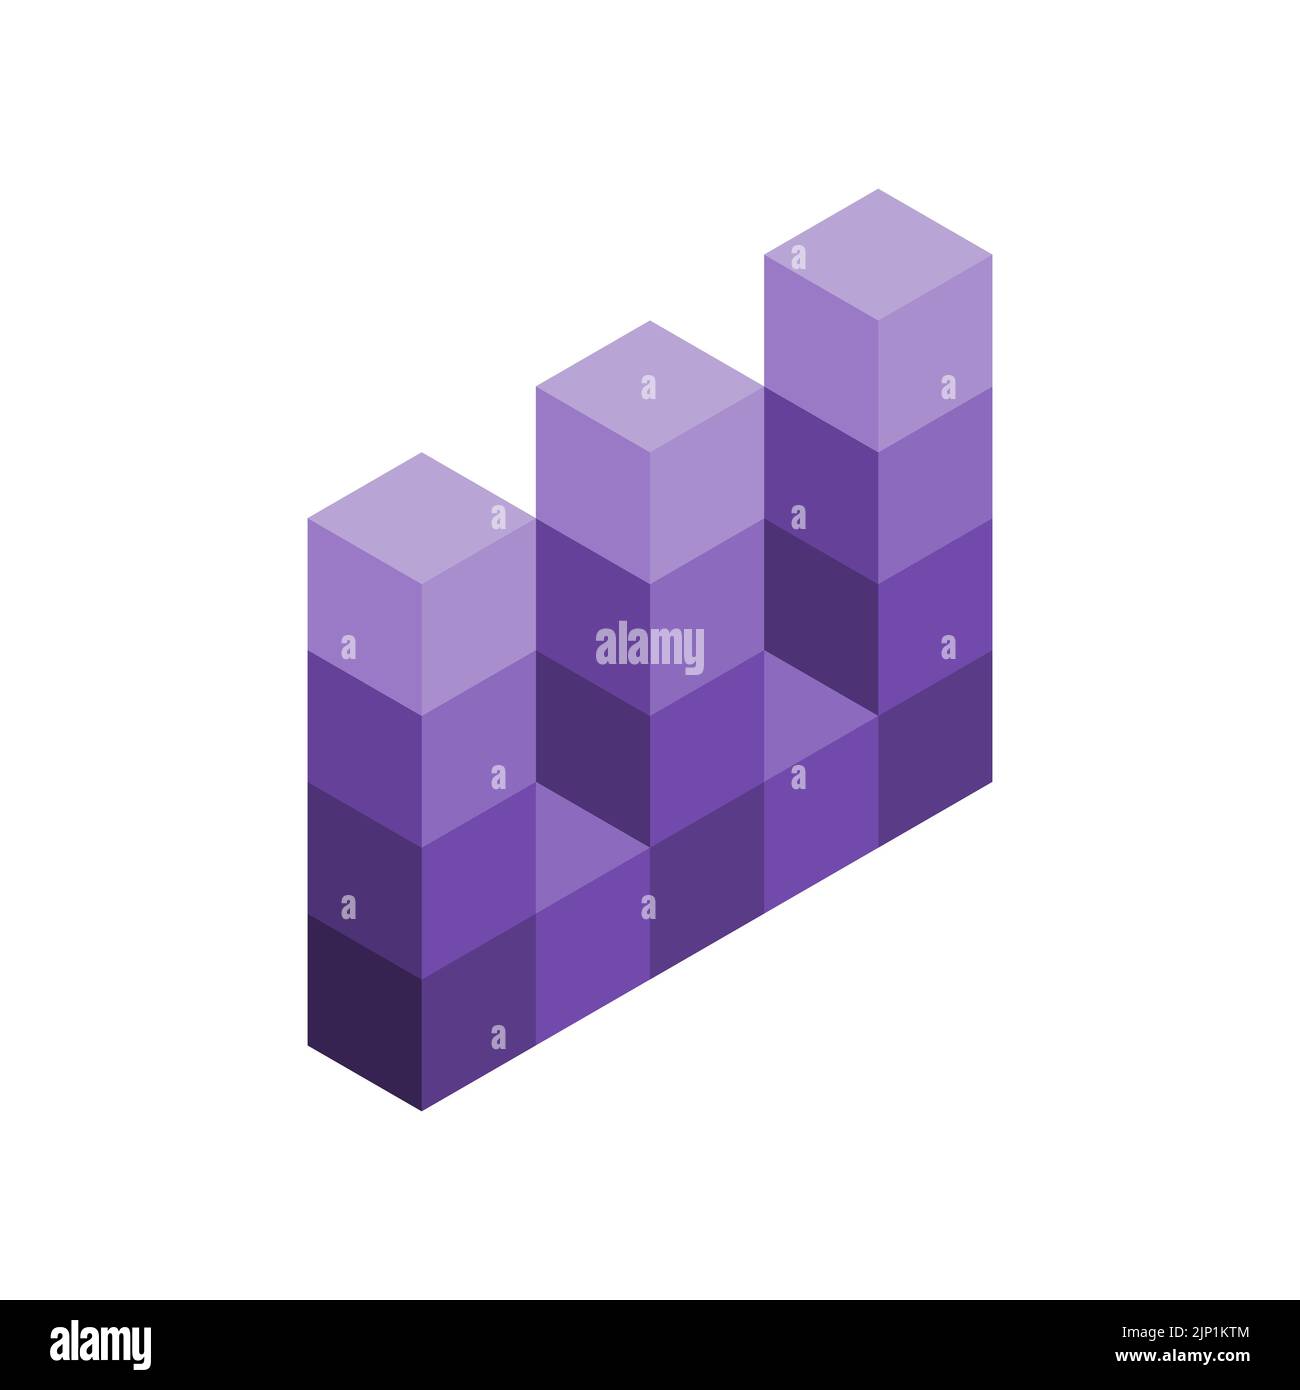 Letter W made of cubes. Lavender 3D W logo. Web technology concept. Network data connections idea. Isometric W box. Alphabet U and U template. Vector Stock Vector